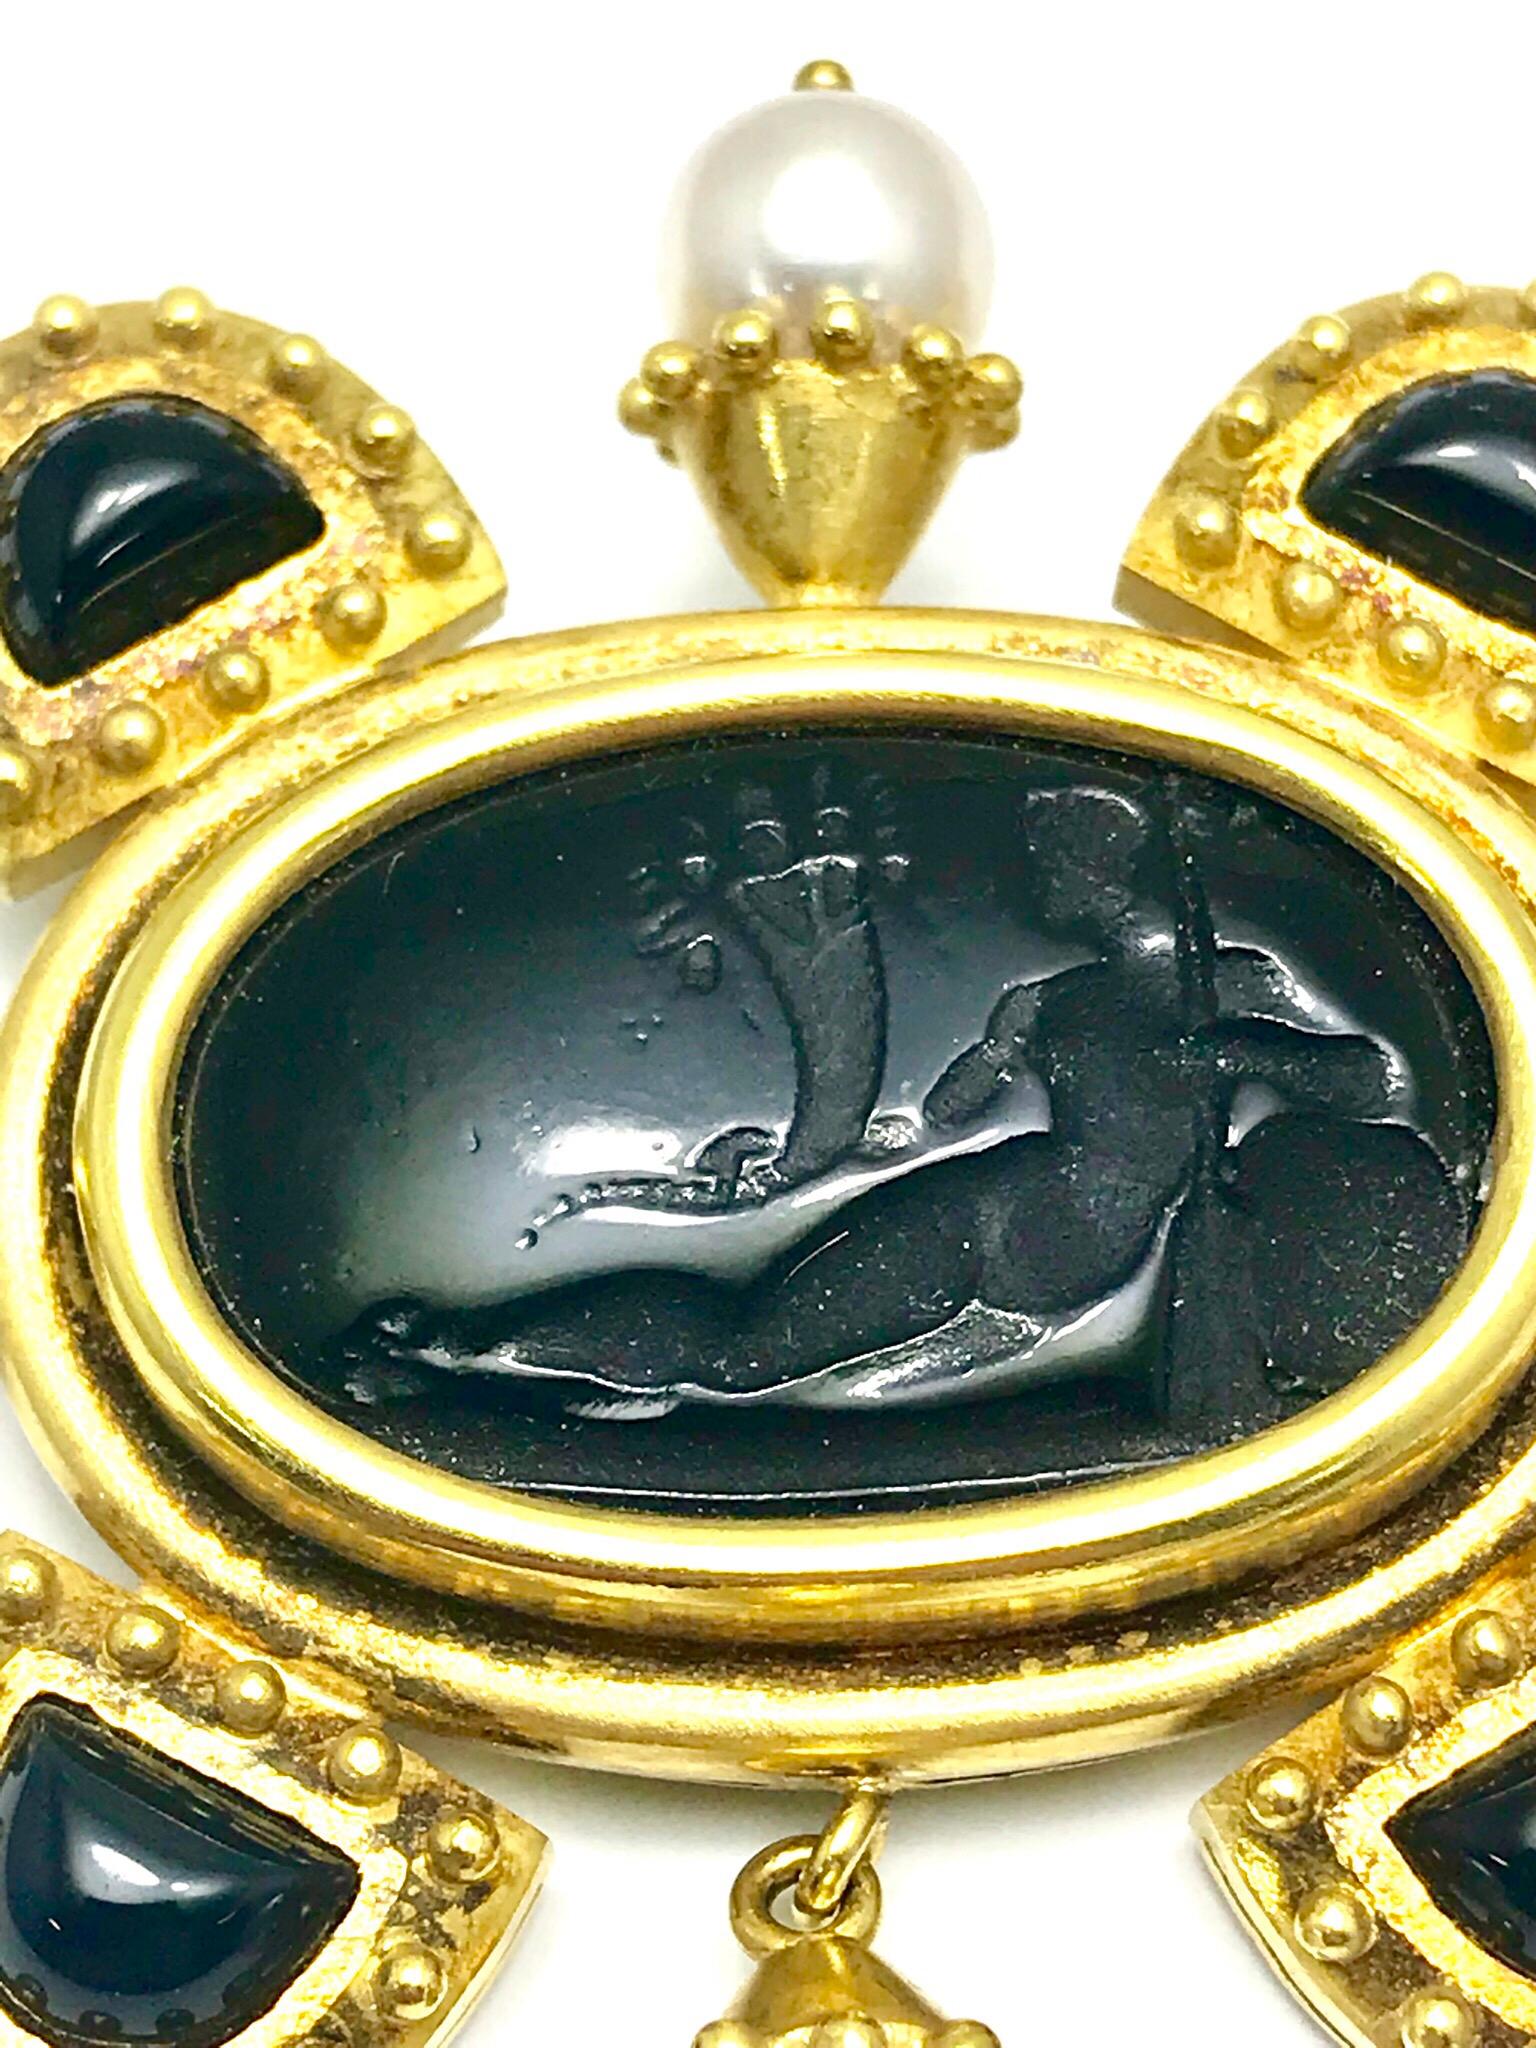 Elizabeth Locke bezel set onyx intaglio brooch in 18 karat yellow gold, with cultured pearls extending from the center, and cabochon onyx pieces surrounded by beaded gold.  The brooch features a double pin back for more stability.  Signed with the